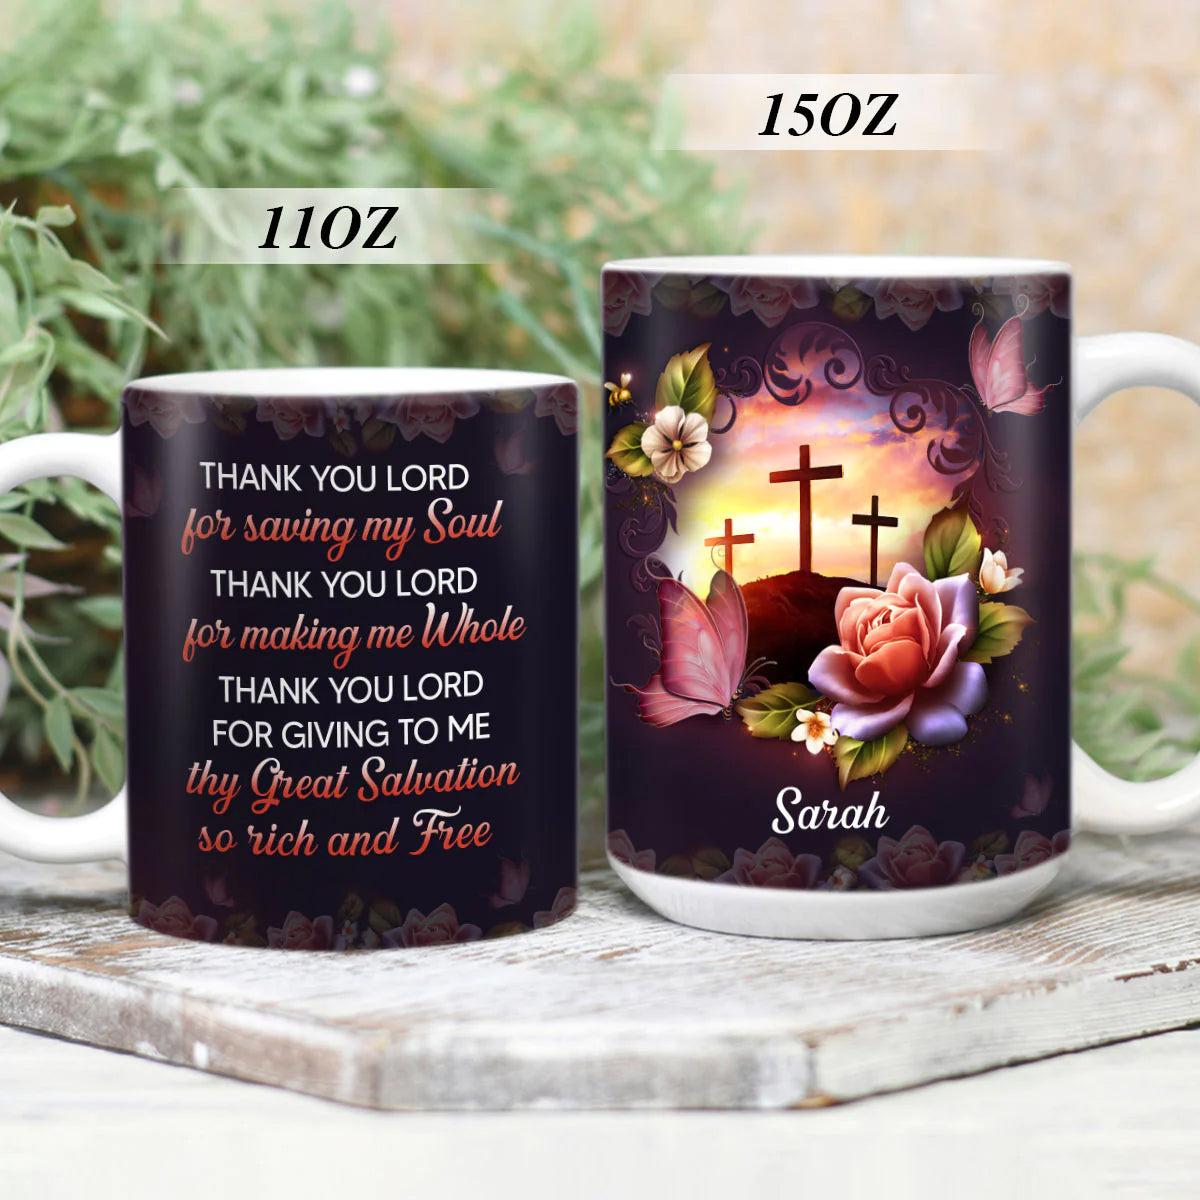 Christianartbag Drinkware, Thank You Lord For Making Me Whole, Personalized Mug, Tumbler, Personalized Gift. - Christian Art Bag